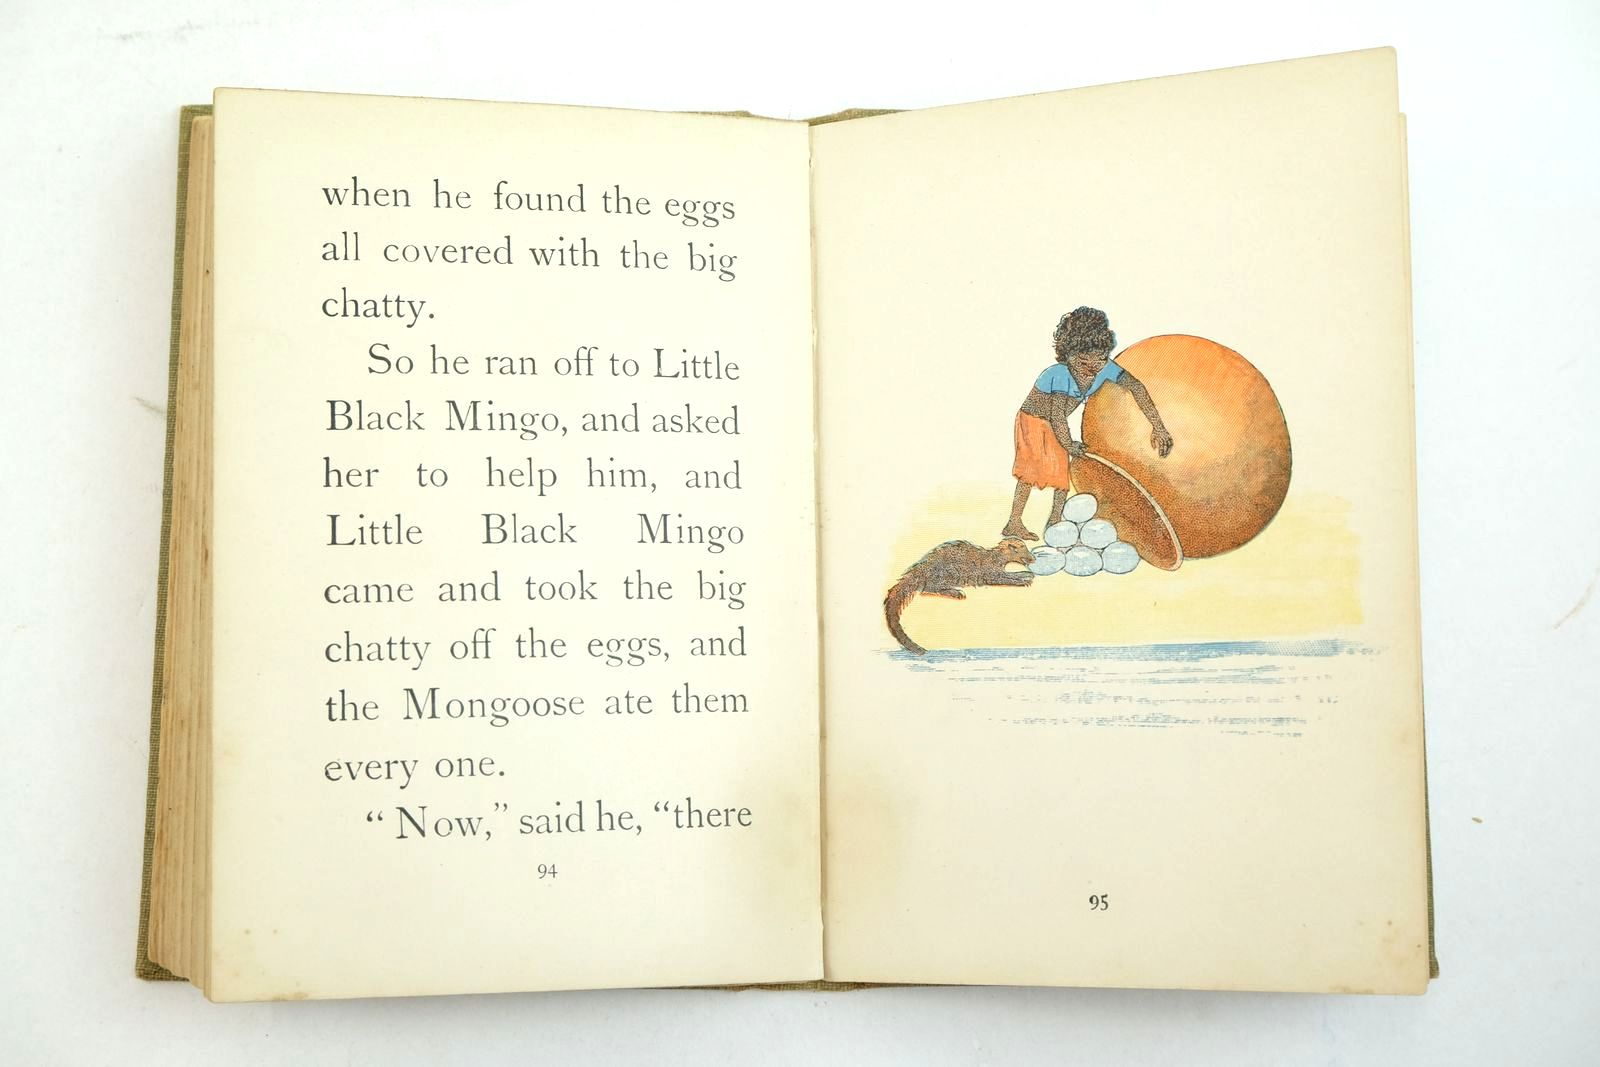 Photo of THE STORY OF LITTLE BLACK MINGO written by Bannerman, Helen illustrated by Bannerman, Helen published by James Nisbet & Co. Ltd. (STOCK CODE: 2134776)  for sale by Stella & Rose's Books